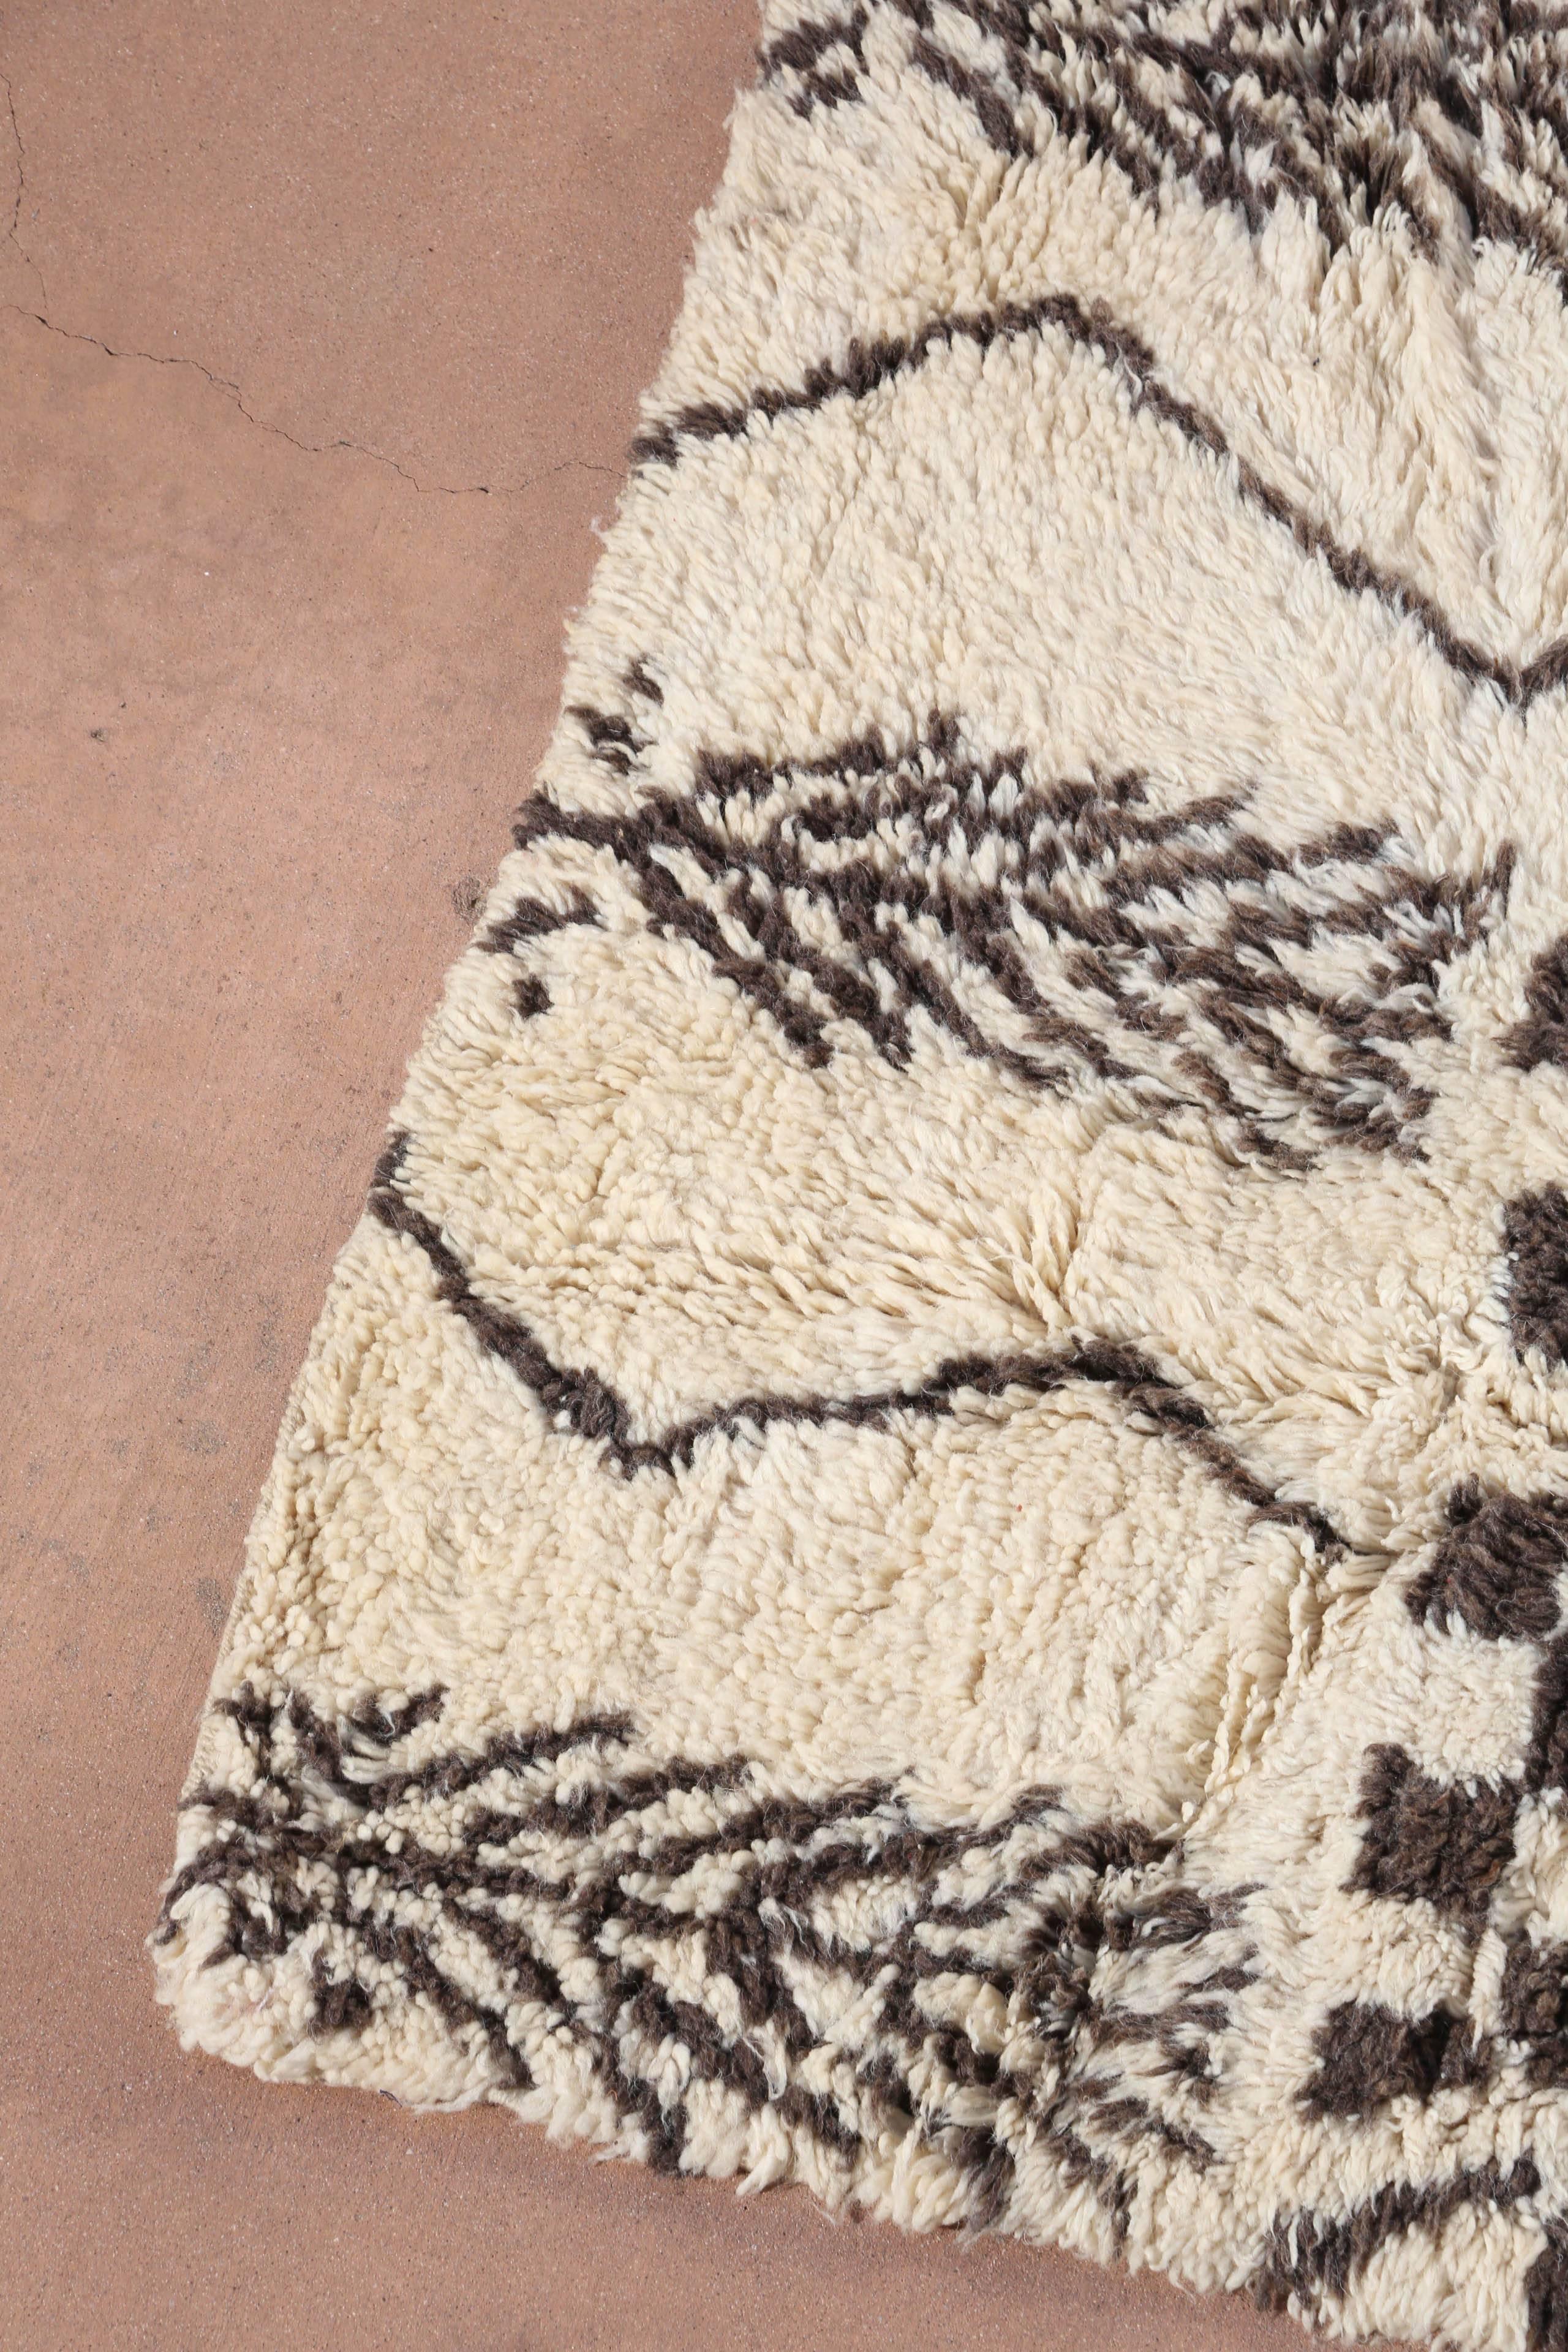 Moroccan Beni Ouarain Tribal Rug.
Organic white rug with black tribal designs.
Handwoven by Berber women in Morocco.